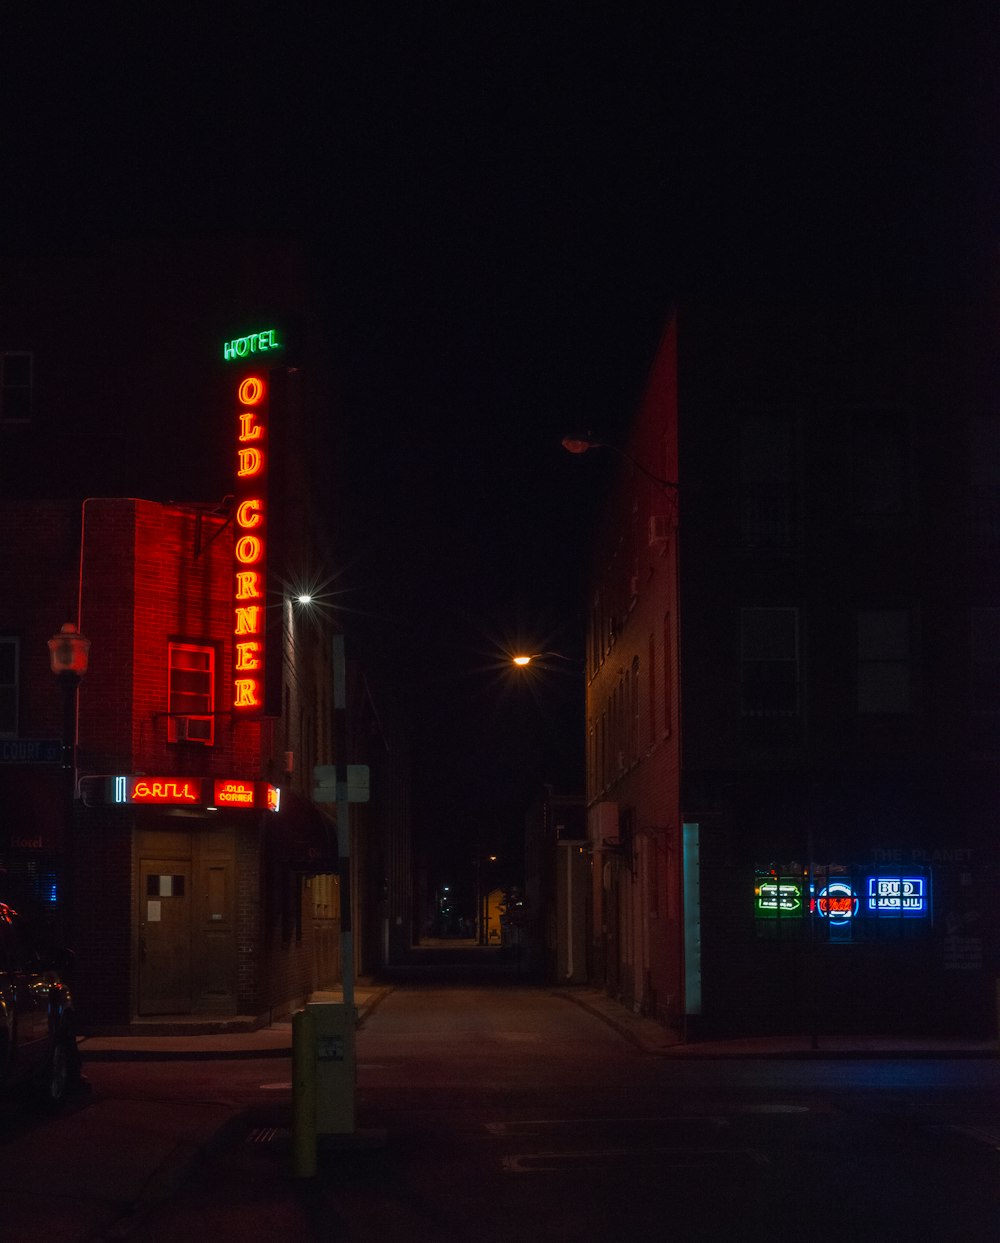 a city street at night with a neon sign